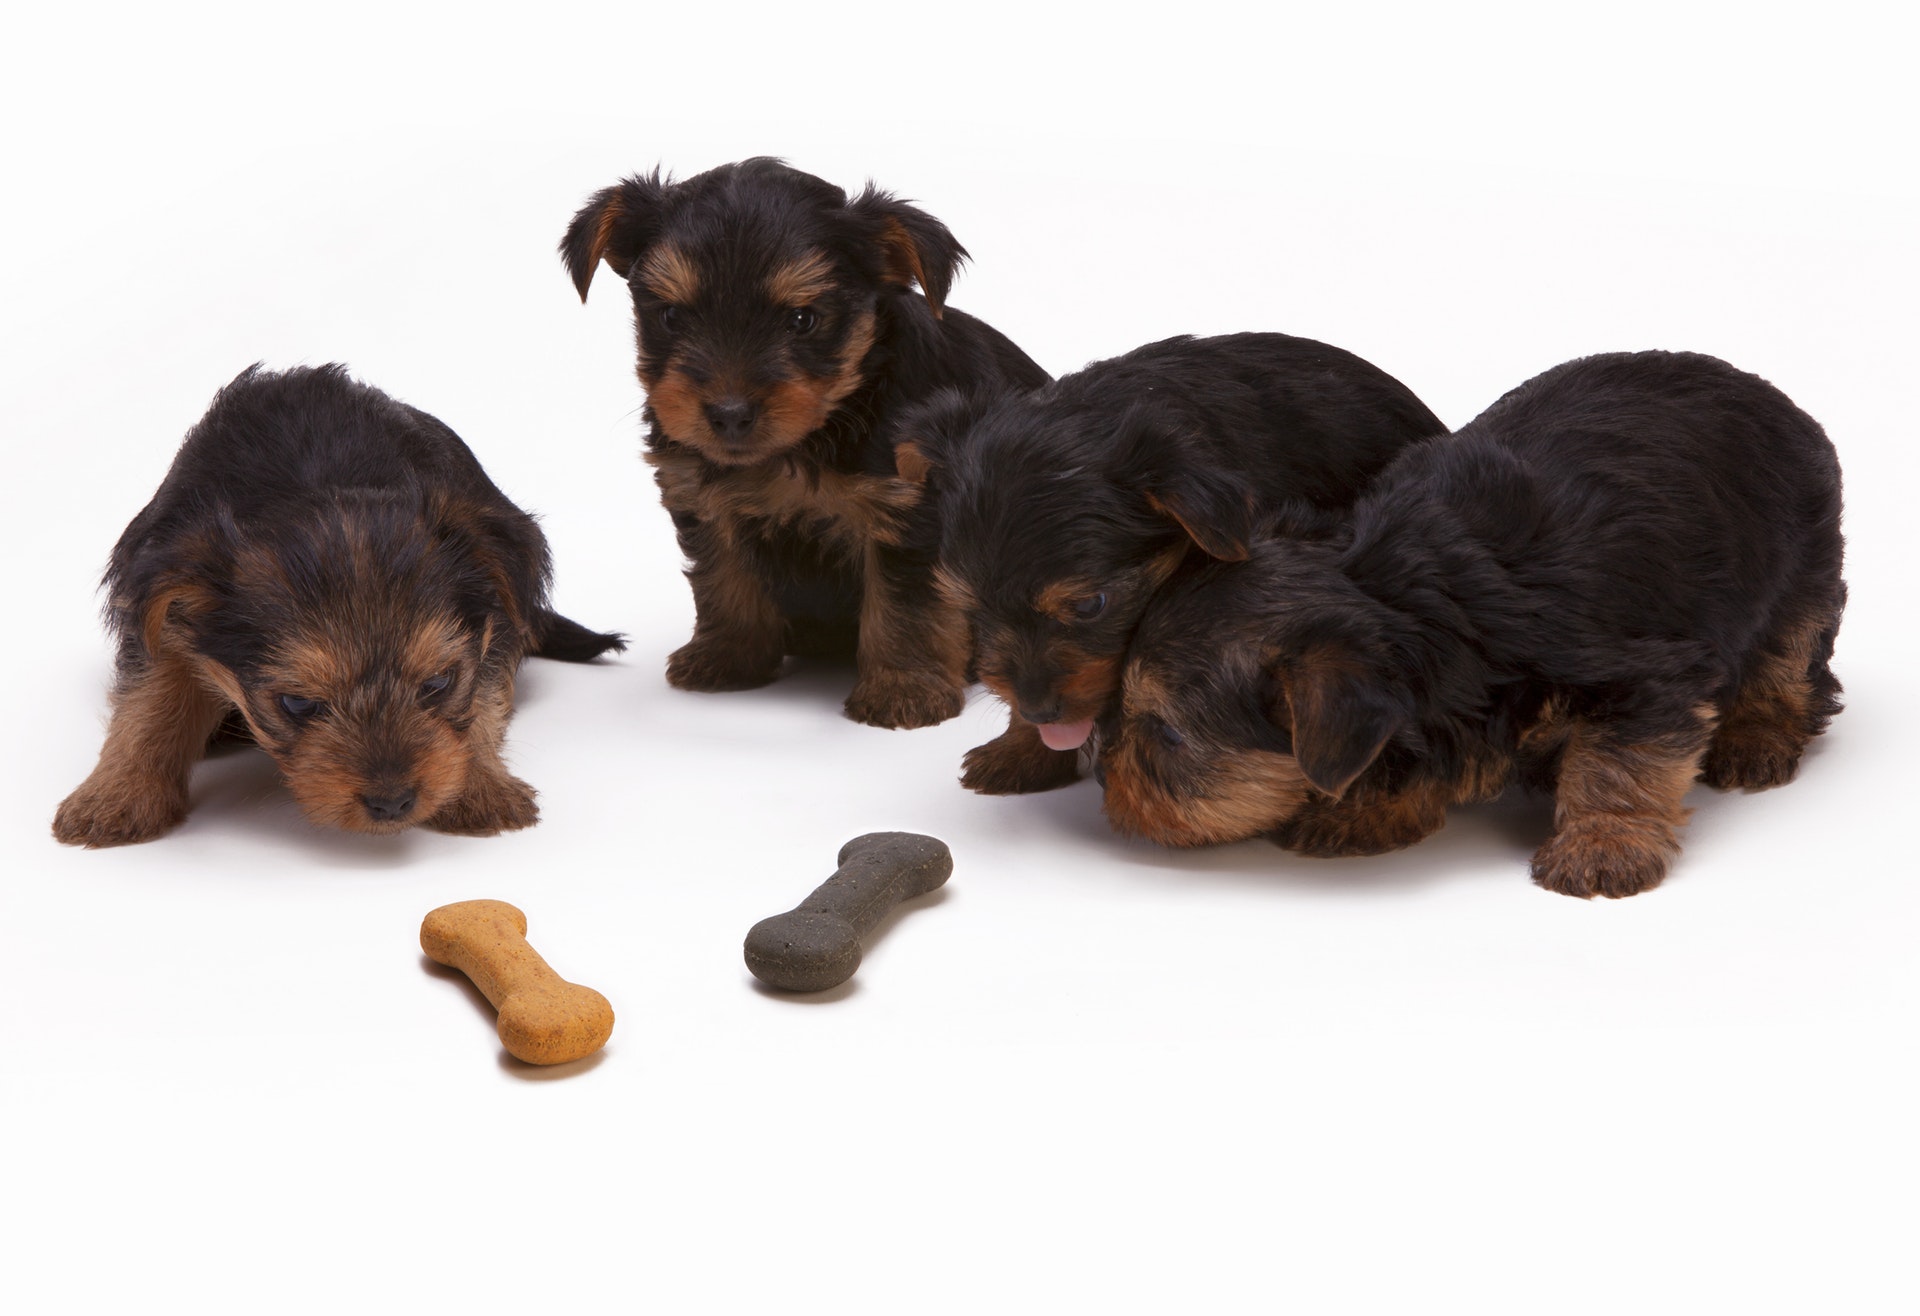 food aggression in puppies